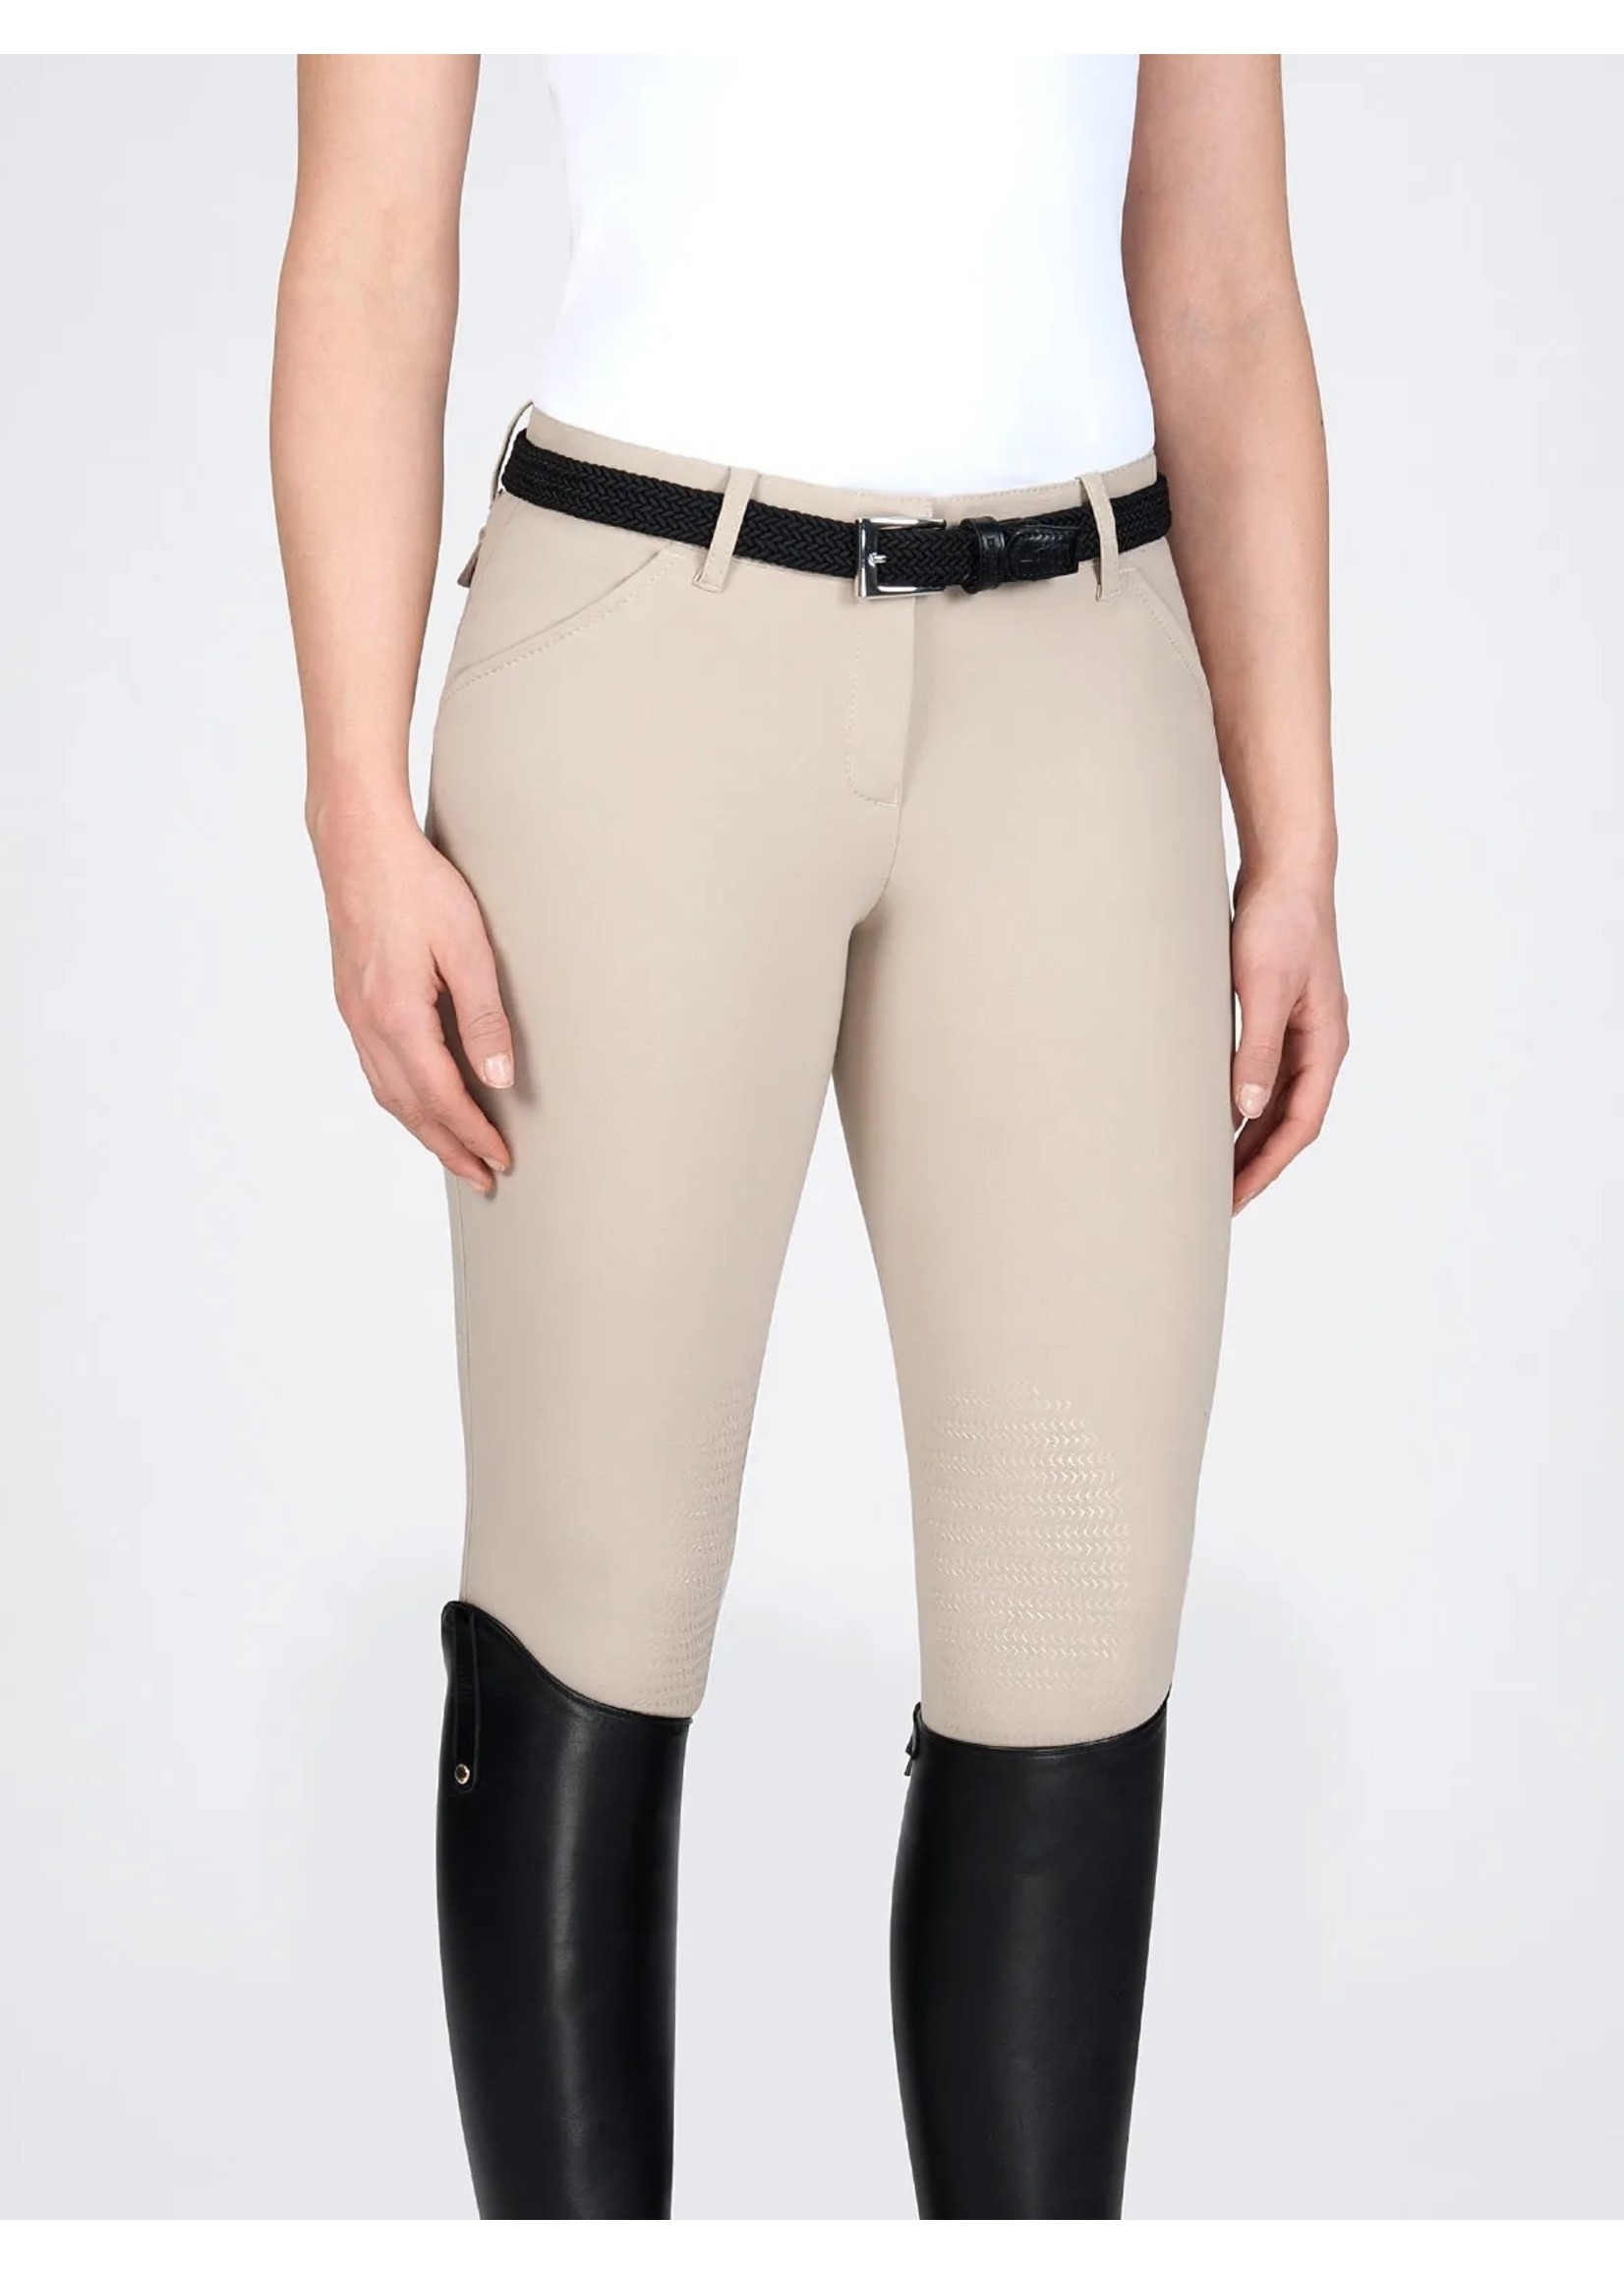 Equiline Equiline Women’s Bice Knee Patch X-Grip breeches